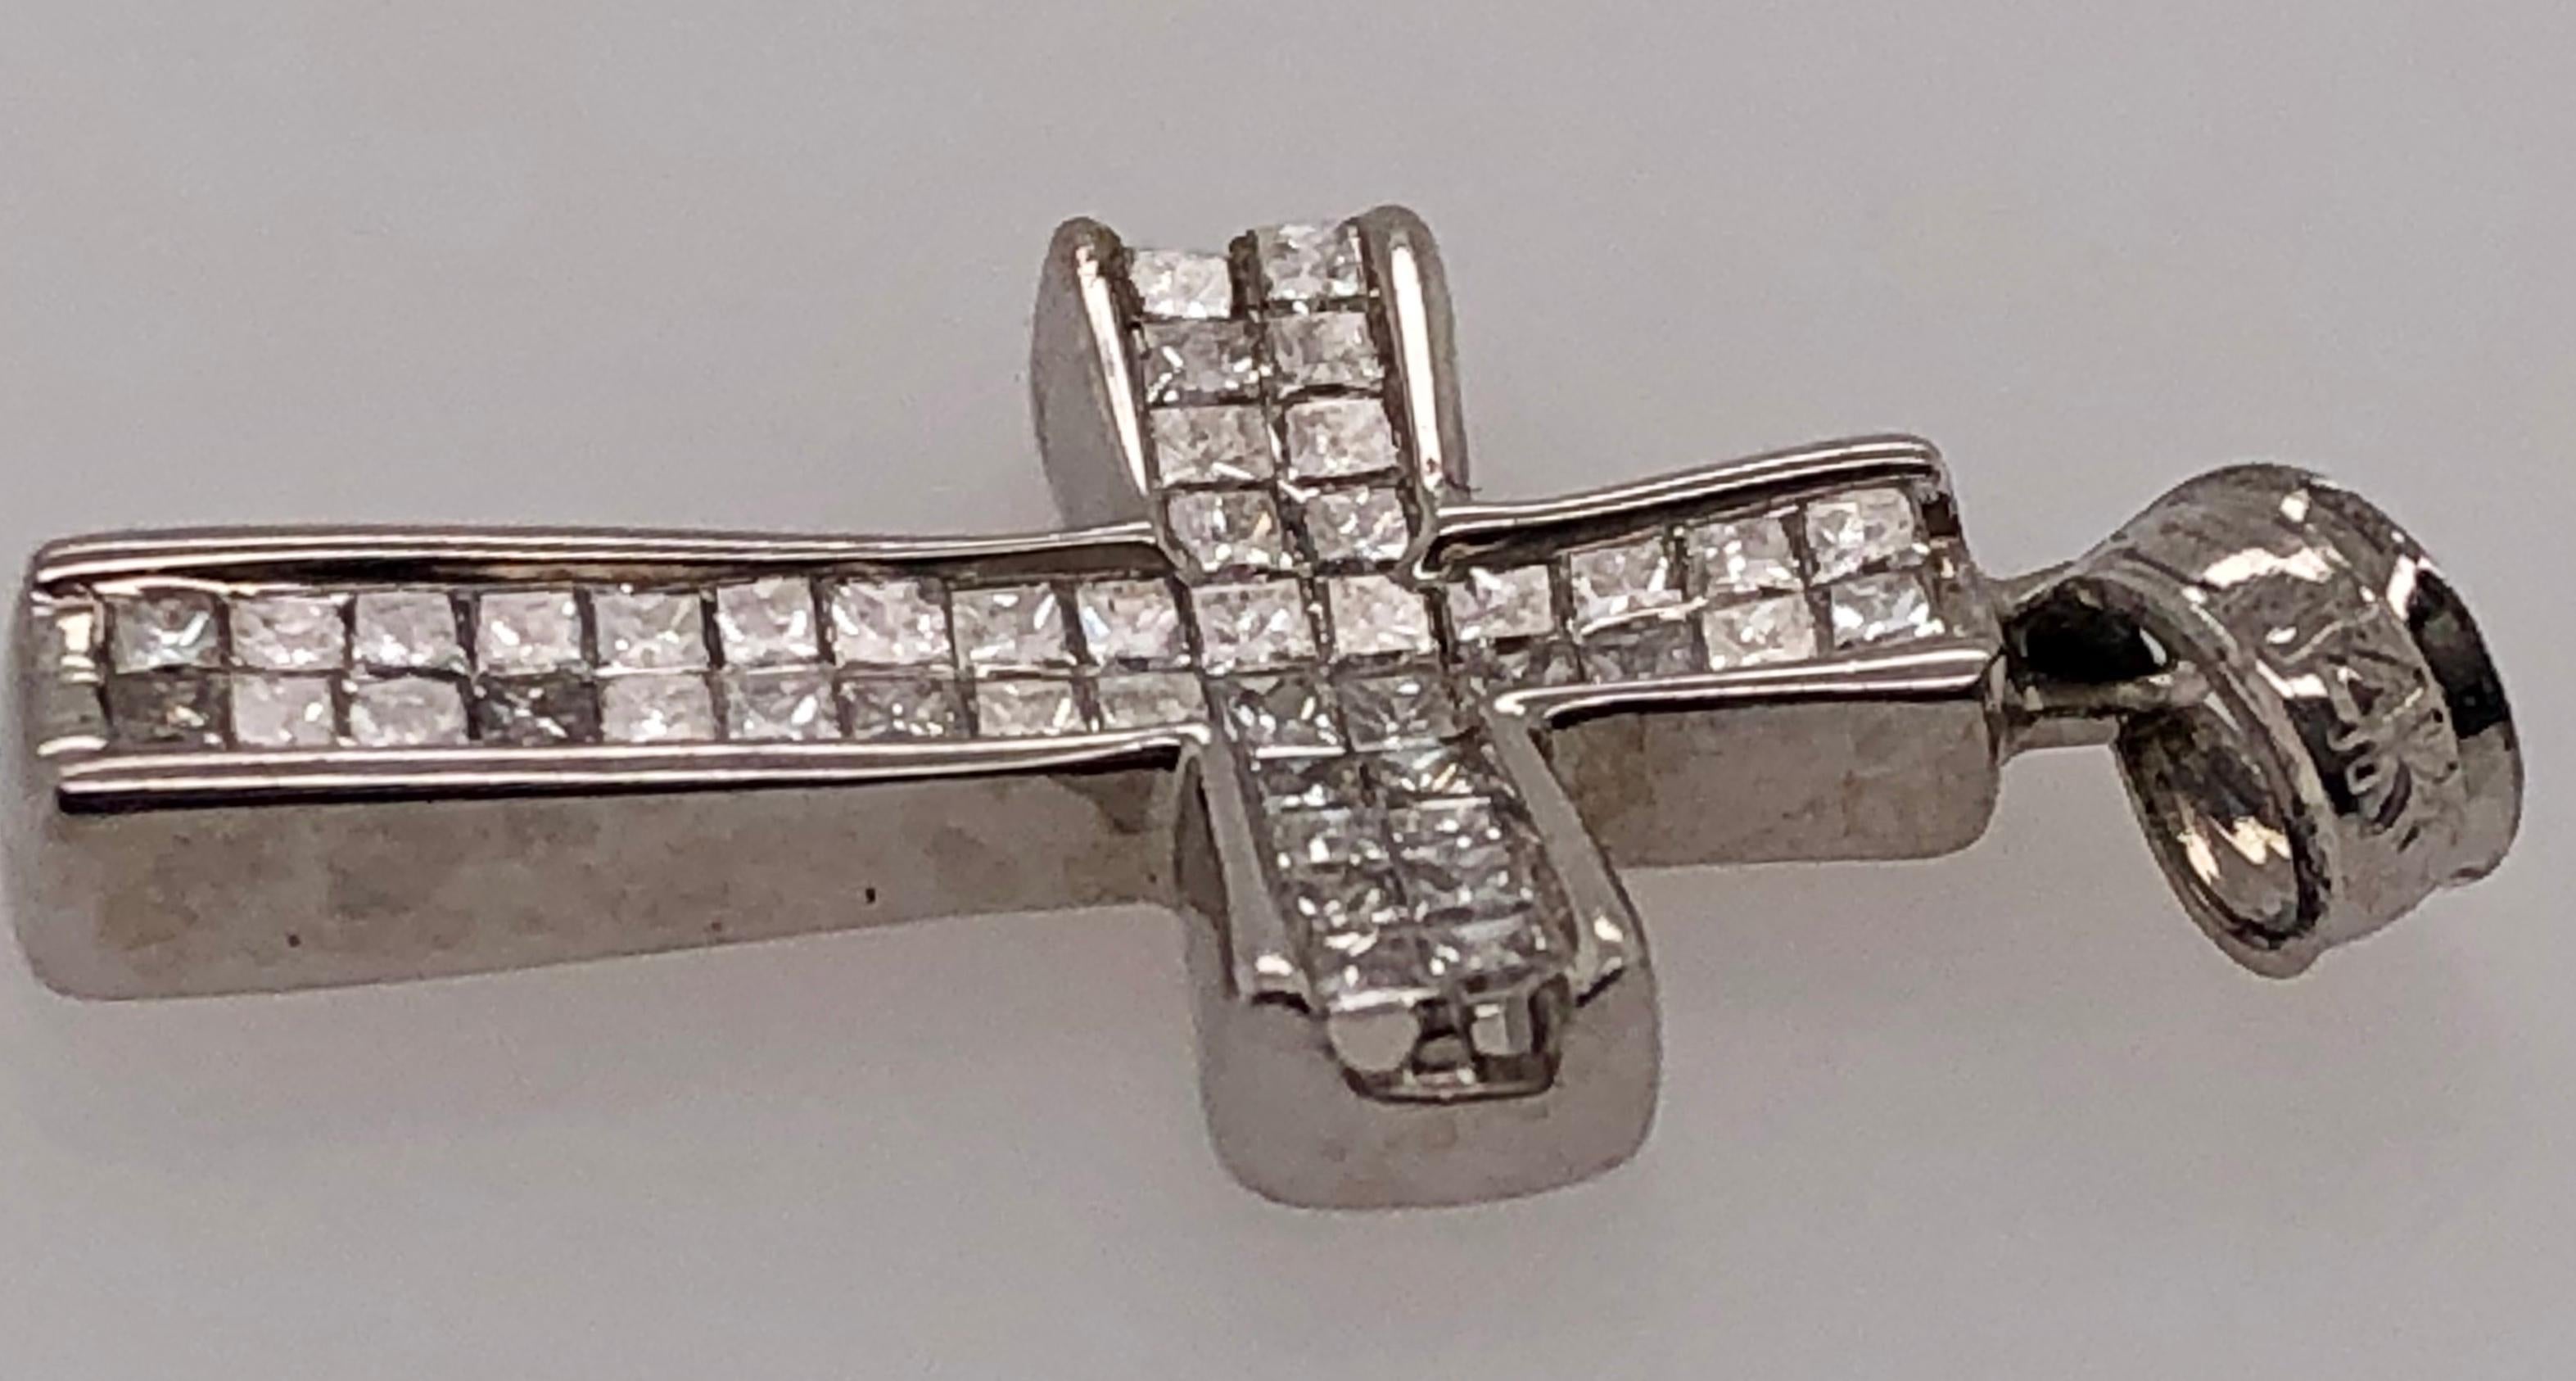 14Kt White Gold Cross Pendant with Square Cushion Diamonds 1.00 Total Diamond Weight
2 grams total weight.